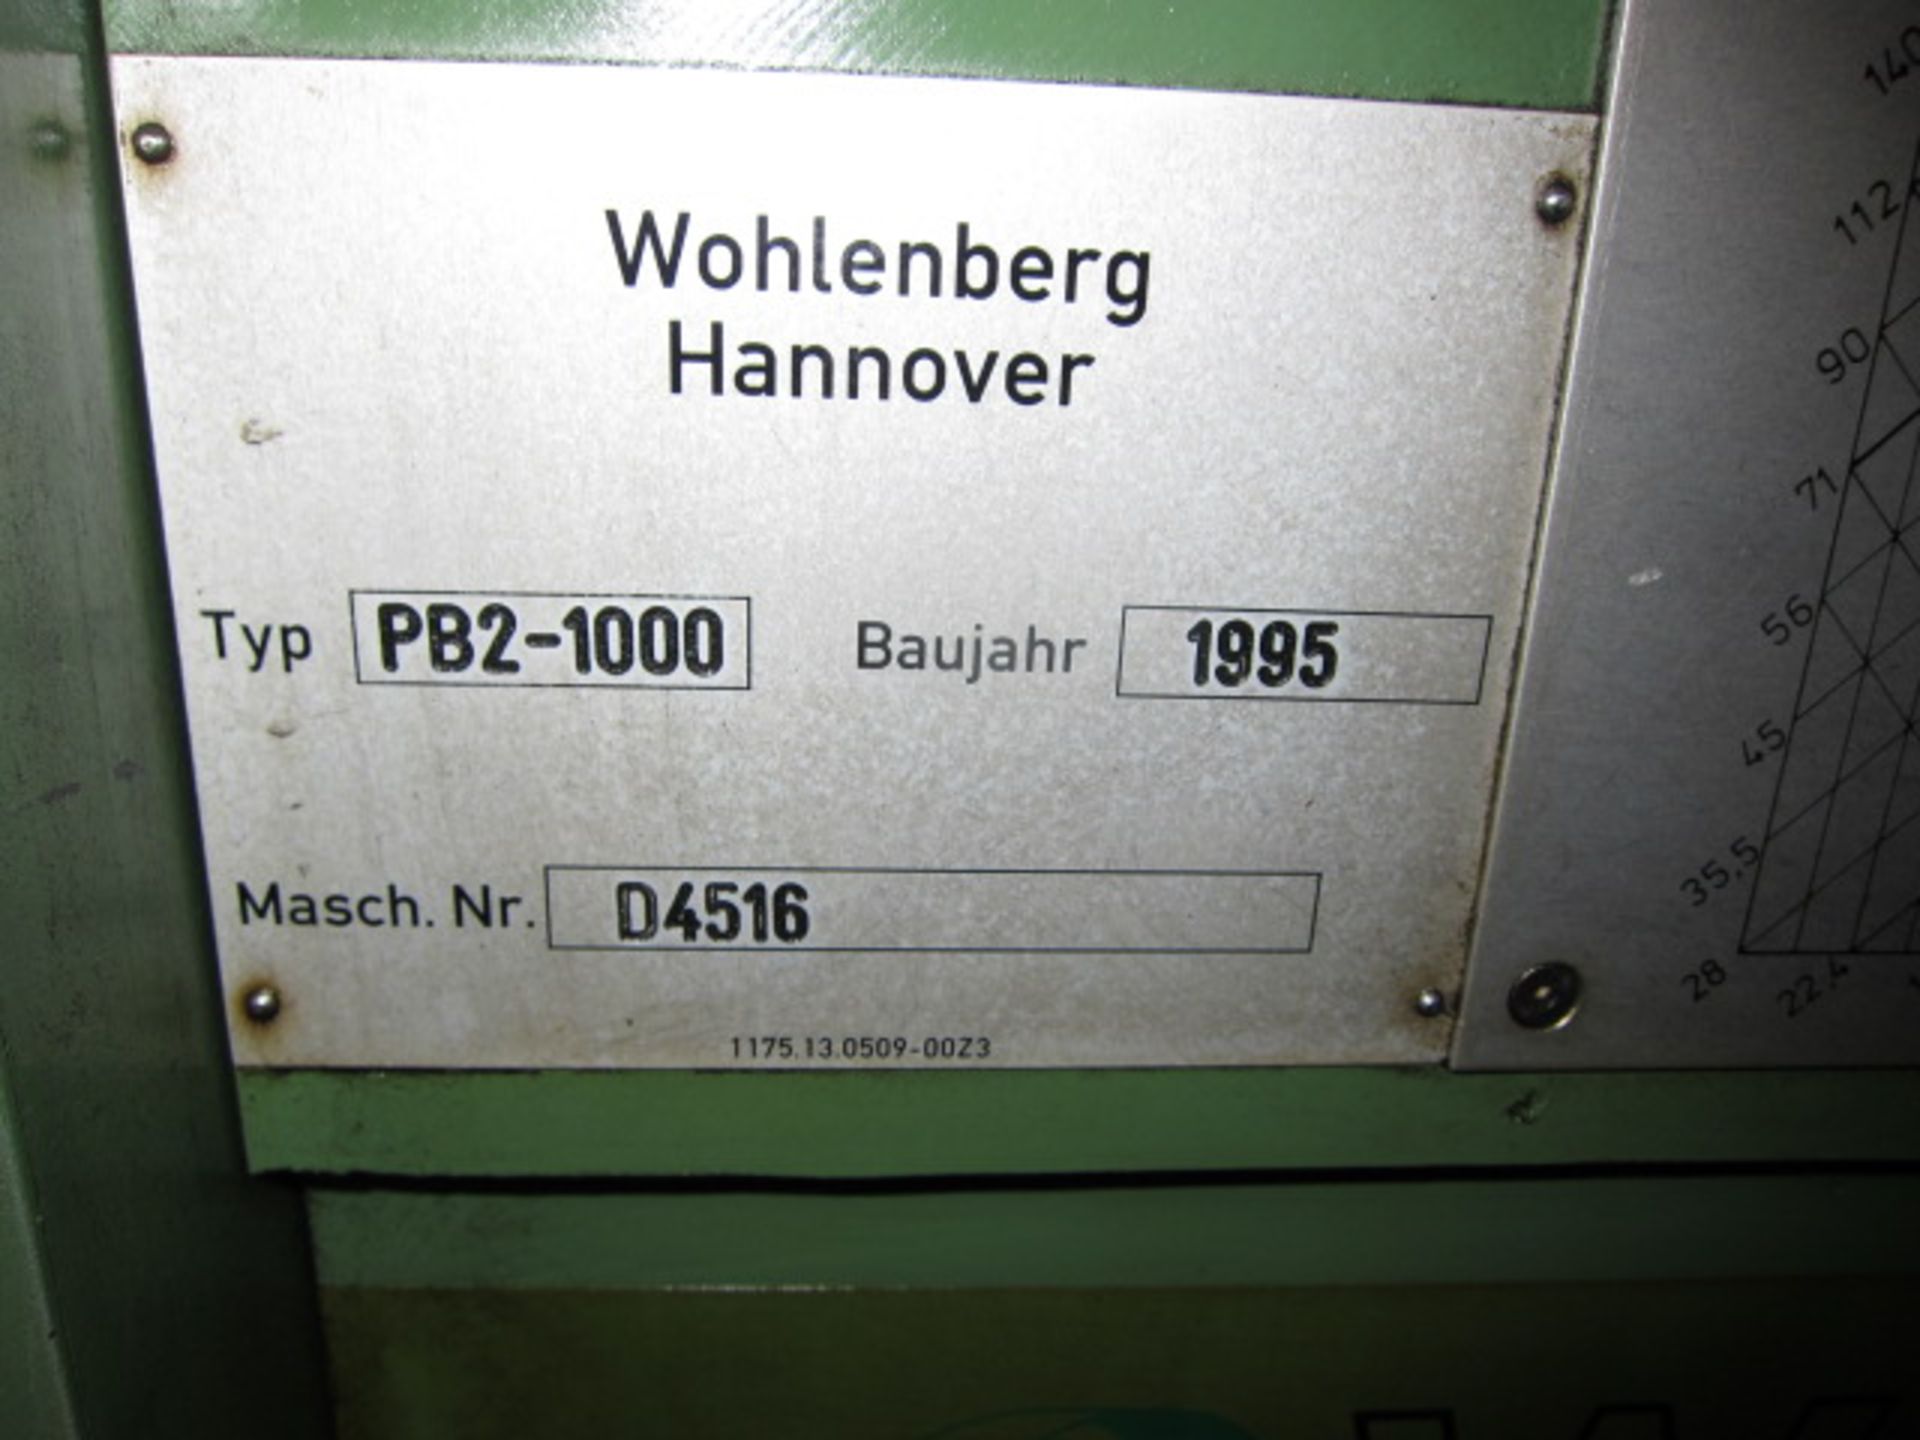 COUNTER ROTATING DEEP HOLE BORING MACHINE, WOHLENBERG MDL. PB2-1000 X 11M, new 1995, 39.37” sw. over - Image 11 of 38